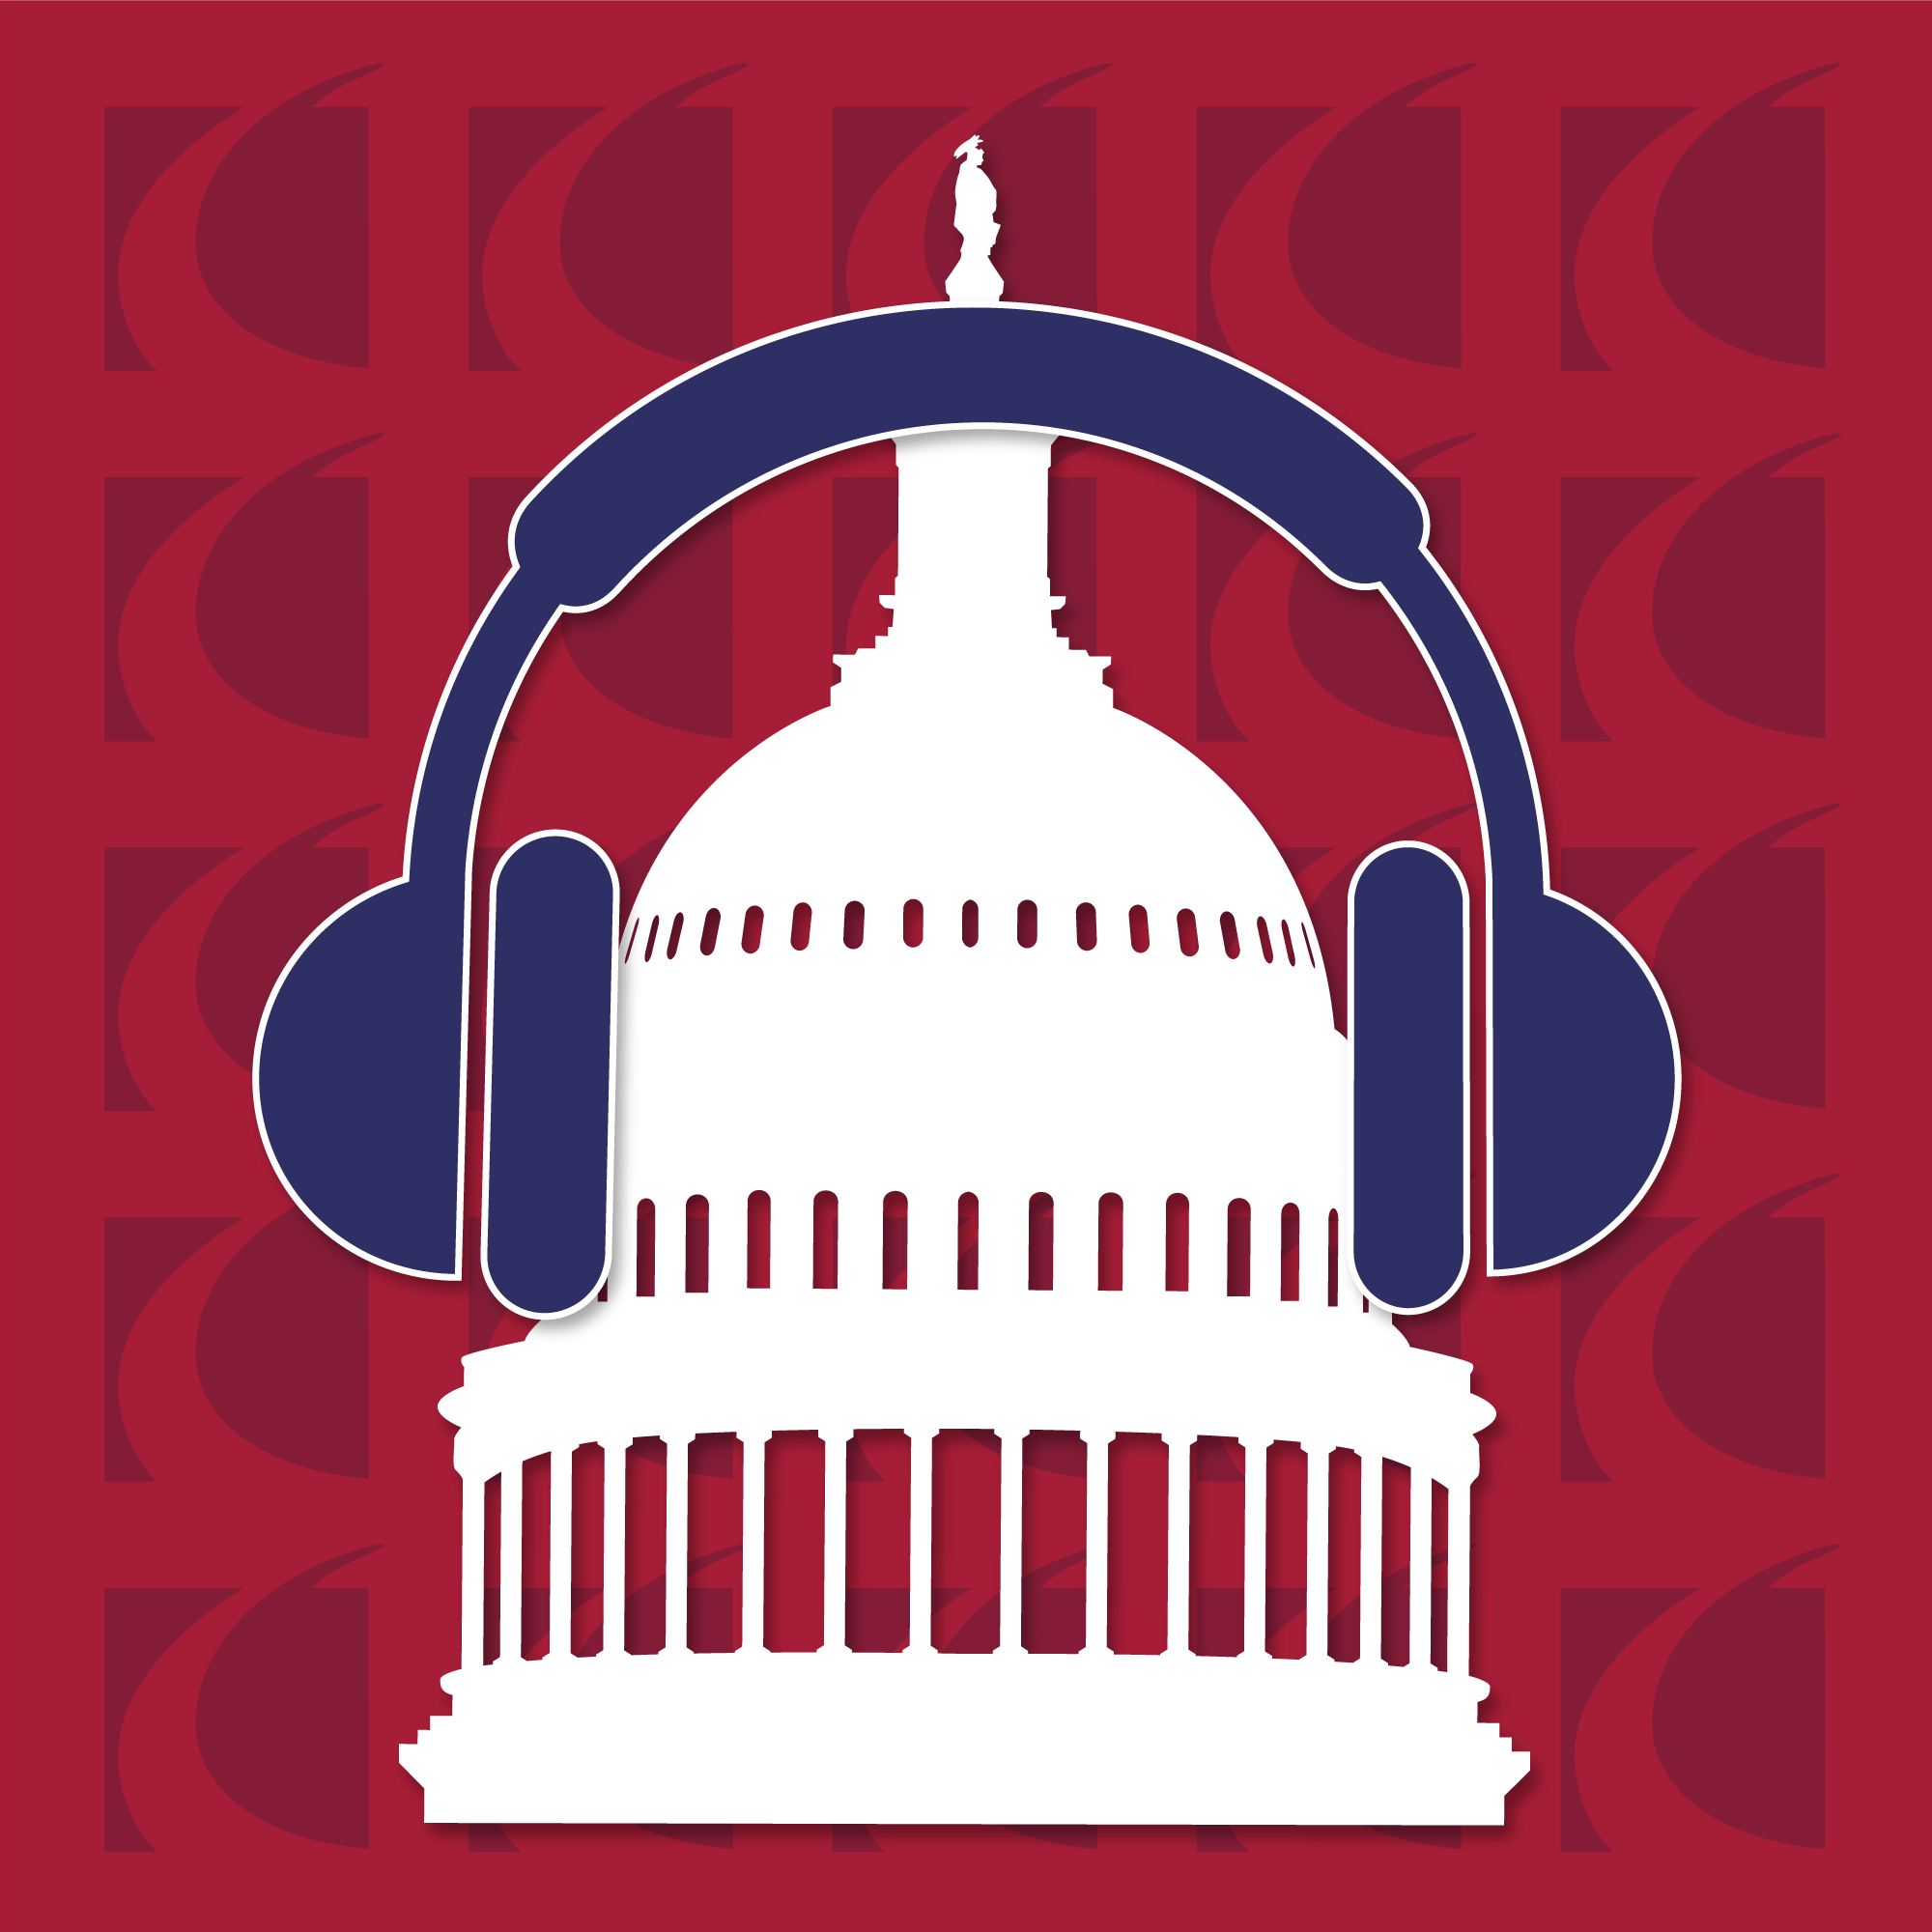 Mar. 31: Fastest 5 Minutes, The Podcast Gov’t Contractors Can’t Do Without - Crowell & Moring LLP